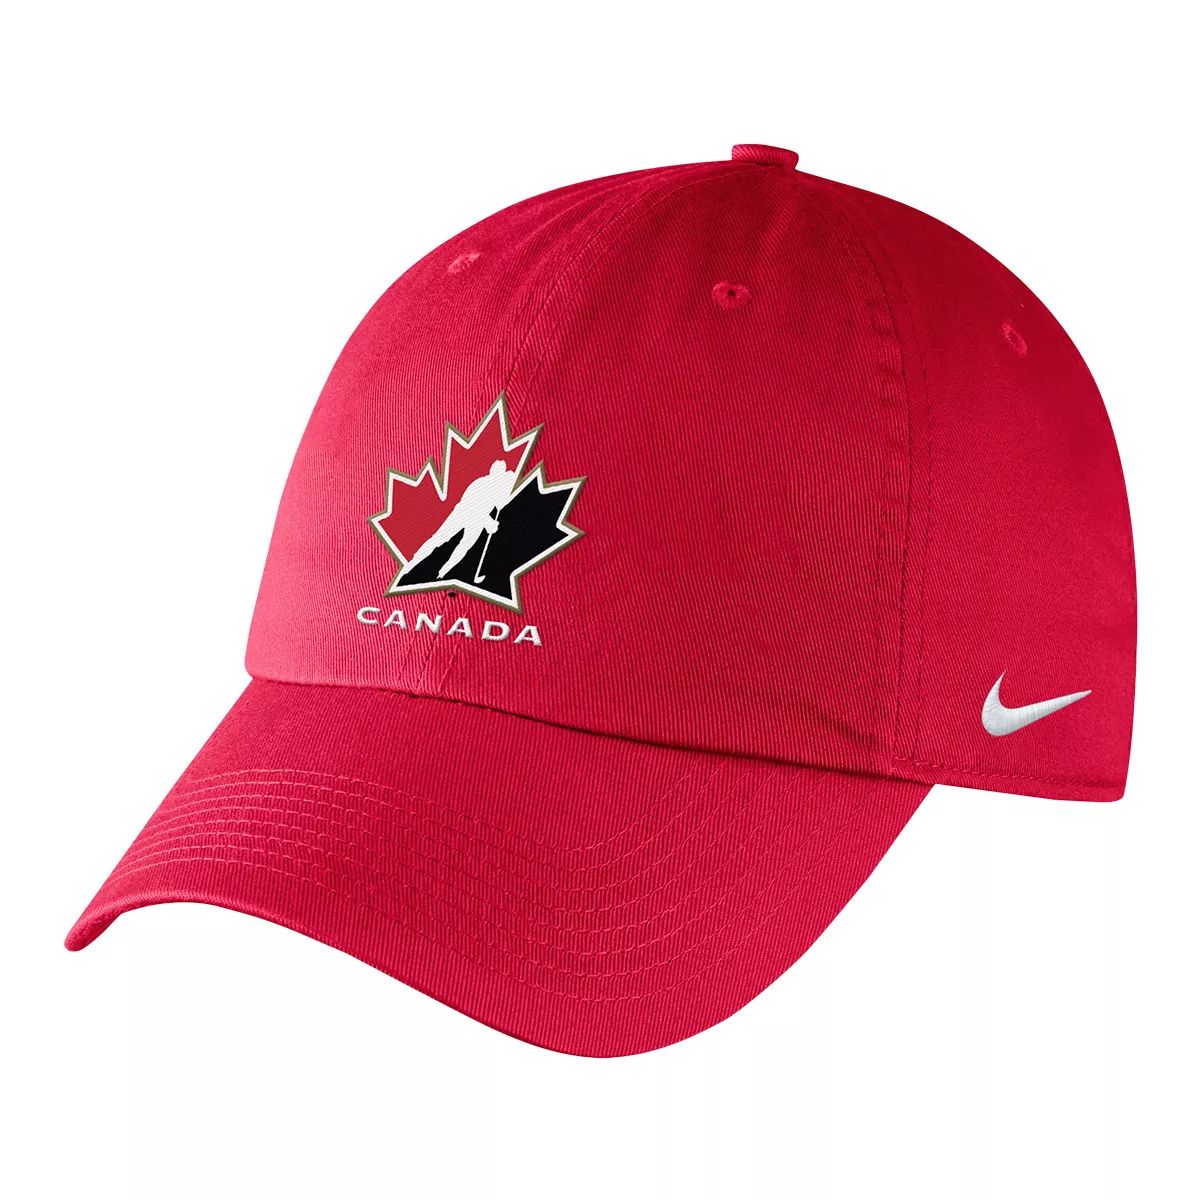 NIKE Team Canada Nike Kids Heritage86 Adjustable Slouch Hat Iihf Hockey Willowbrook Shopping Centre